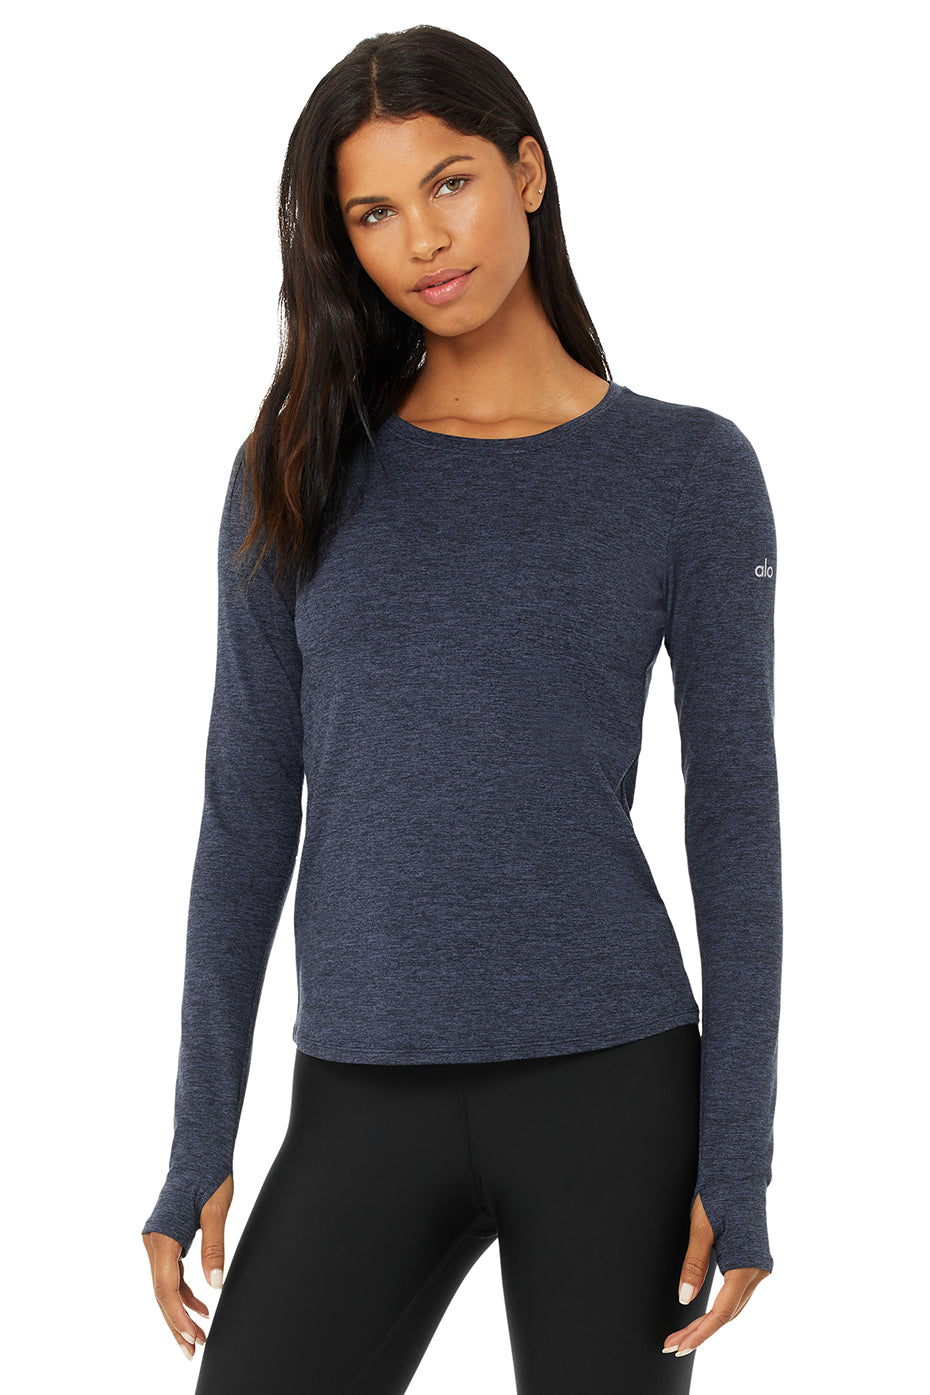 Alosoft Finesse Long Sleeve Top in Rich Navy Heather by Alo Yoga